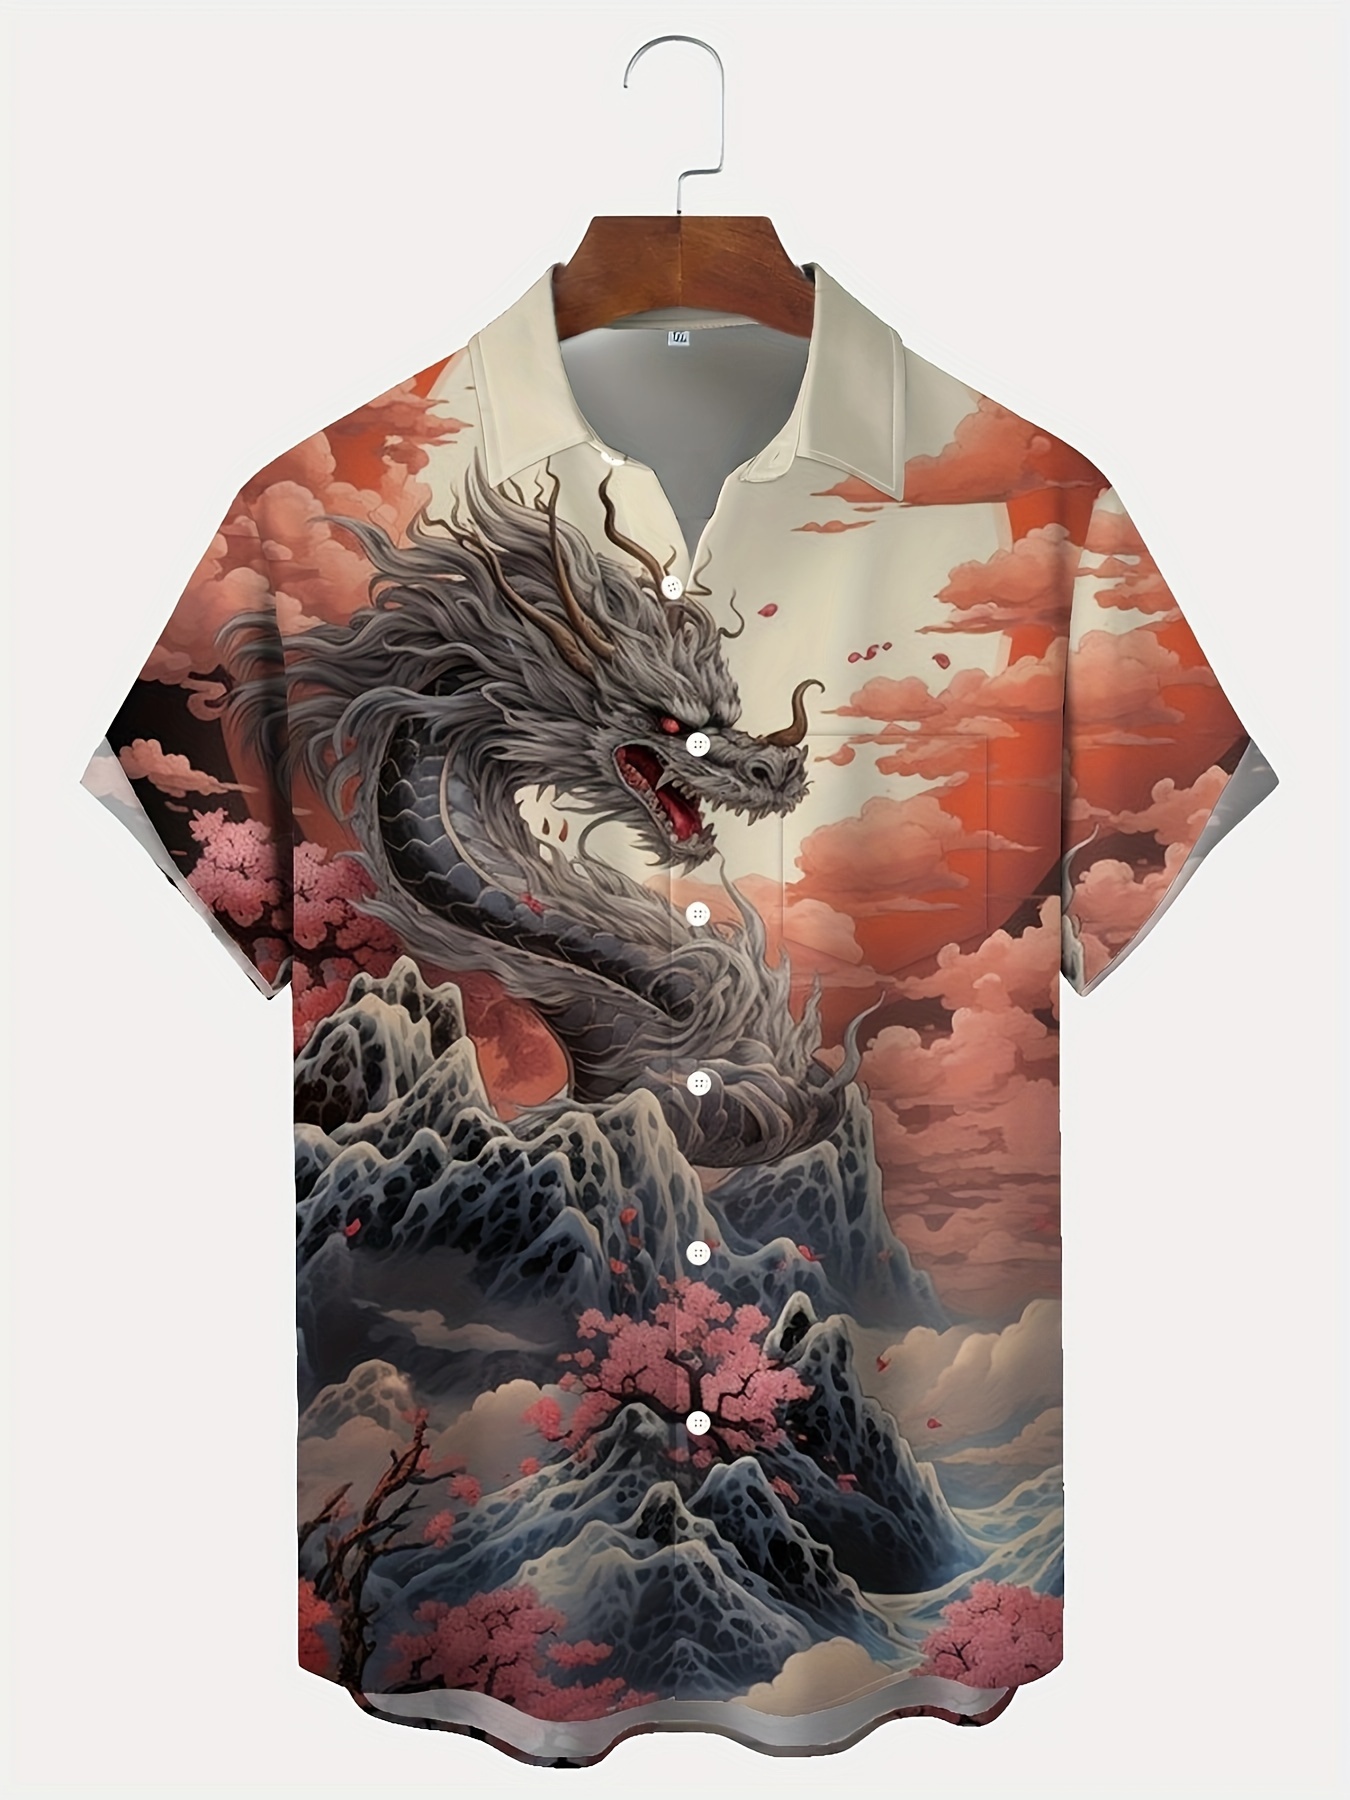 Plus Size Men&#39;s Dragon Graphic Print Shirt For Summer, Handsome Personalized Shirt For Males